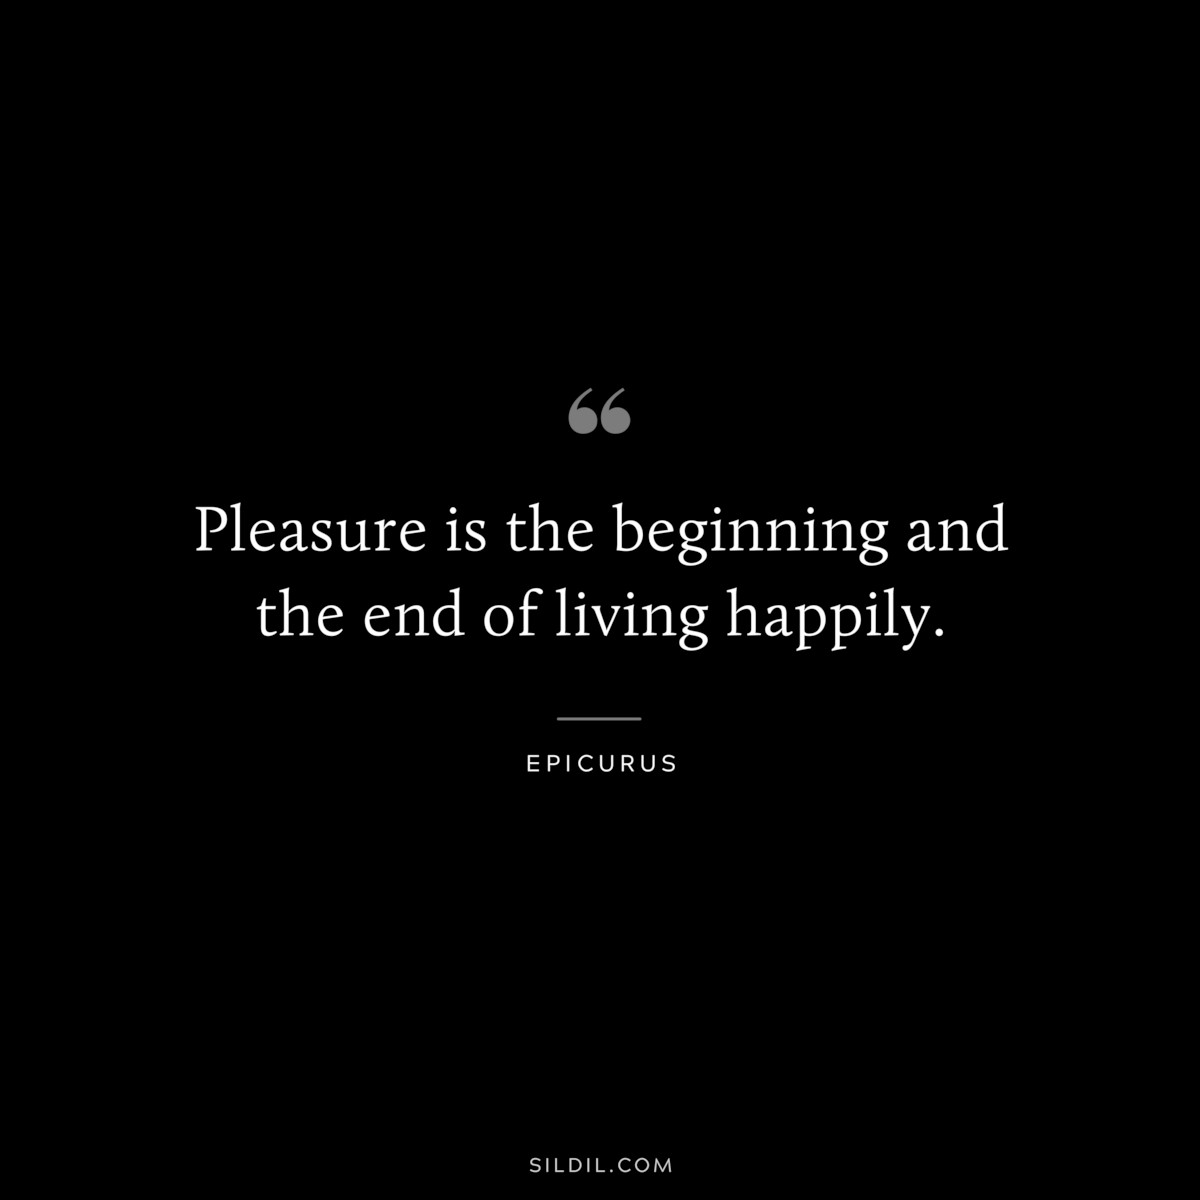 Pleasure is the beginning and the end of living happily. — Epicurus